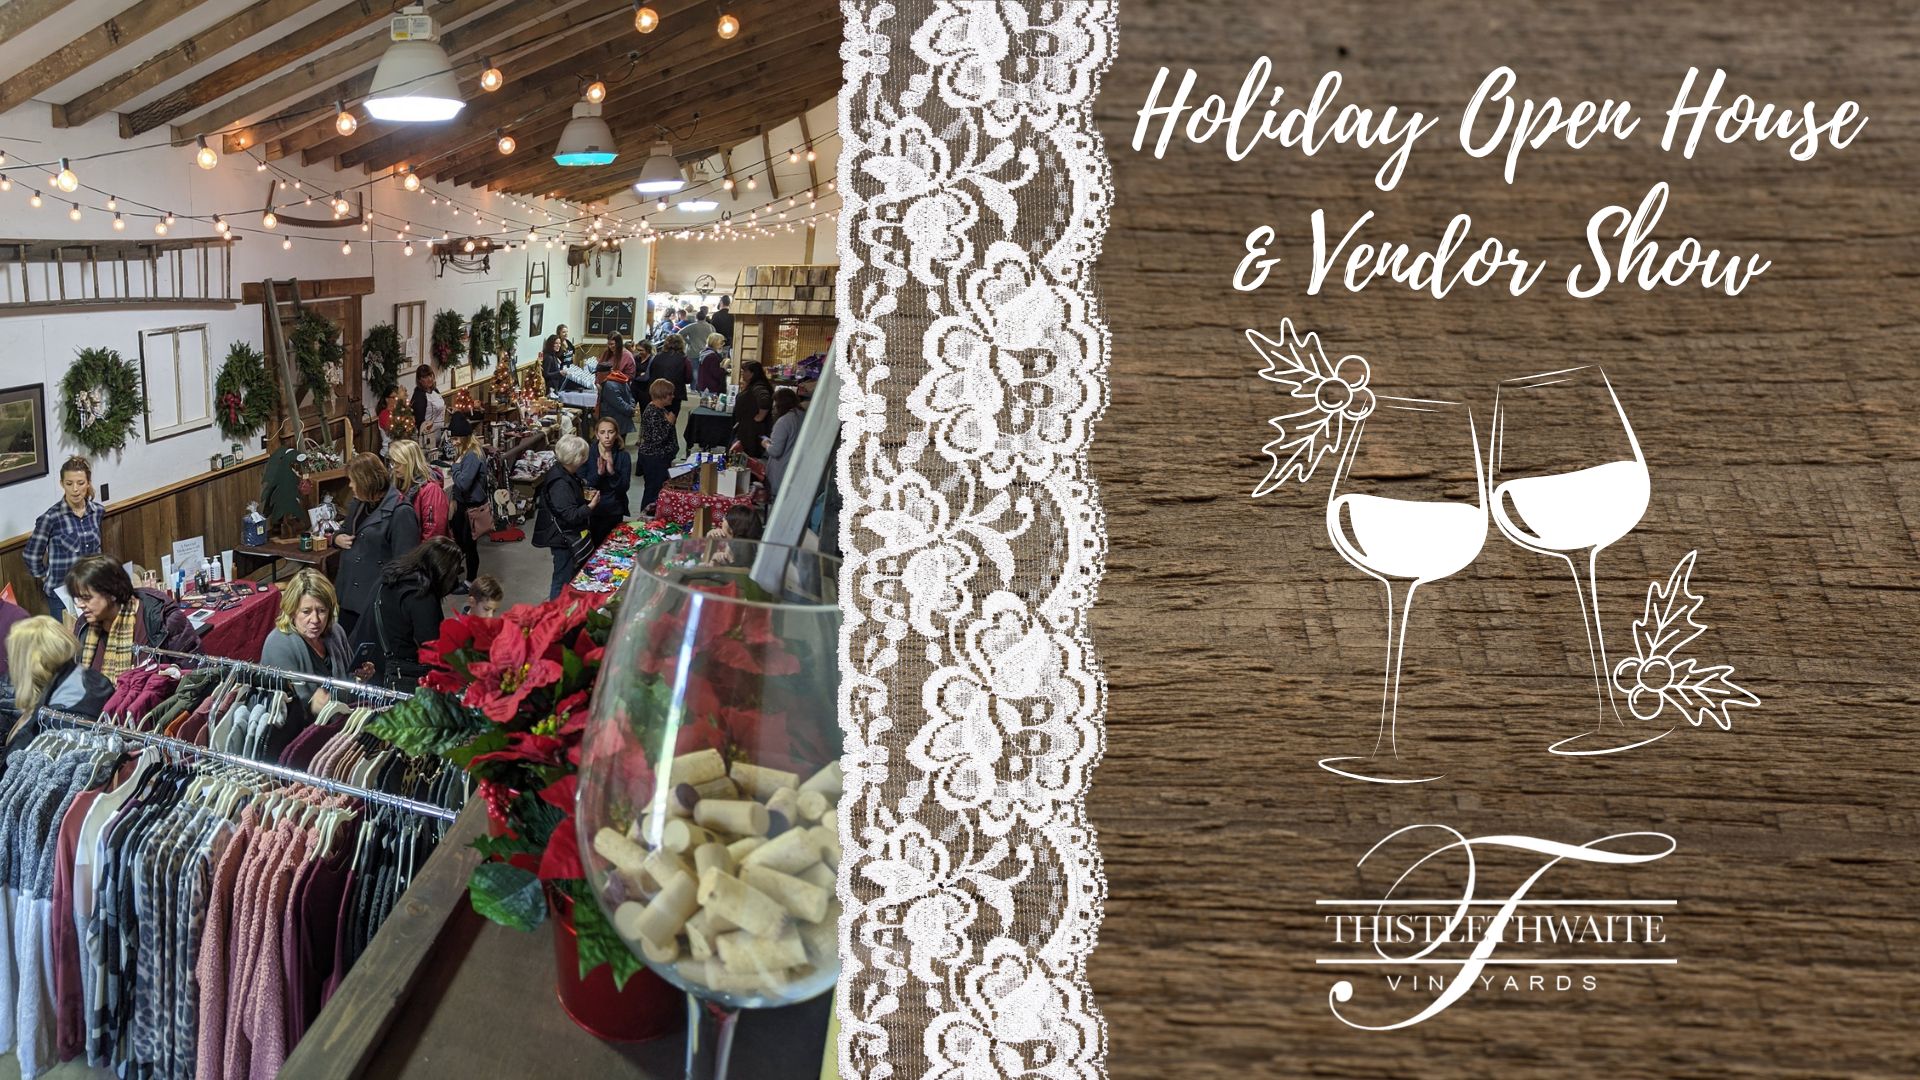 Holliday Open House and Vendor Show